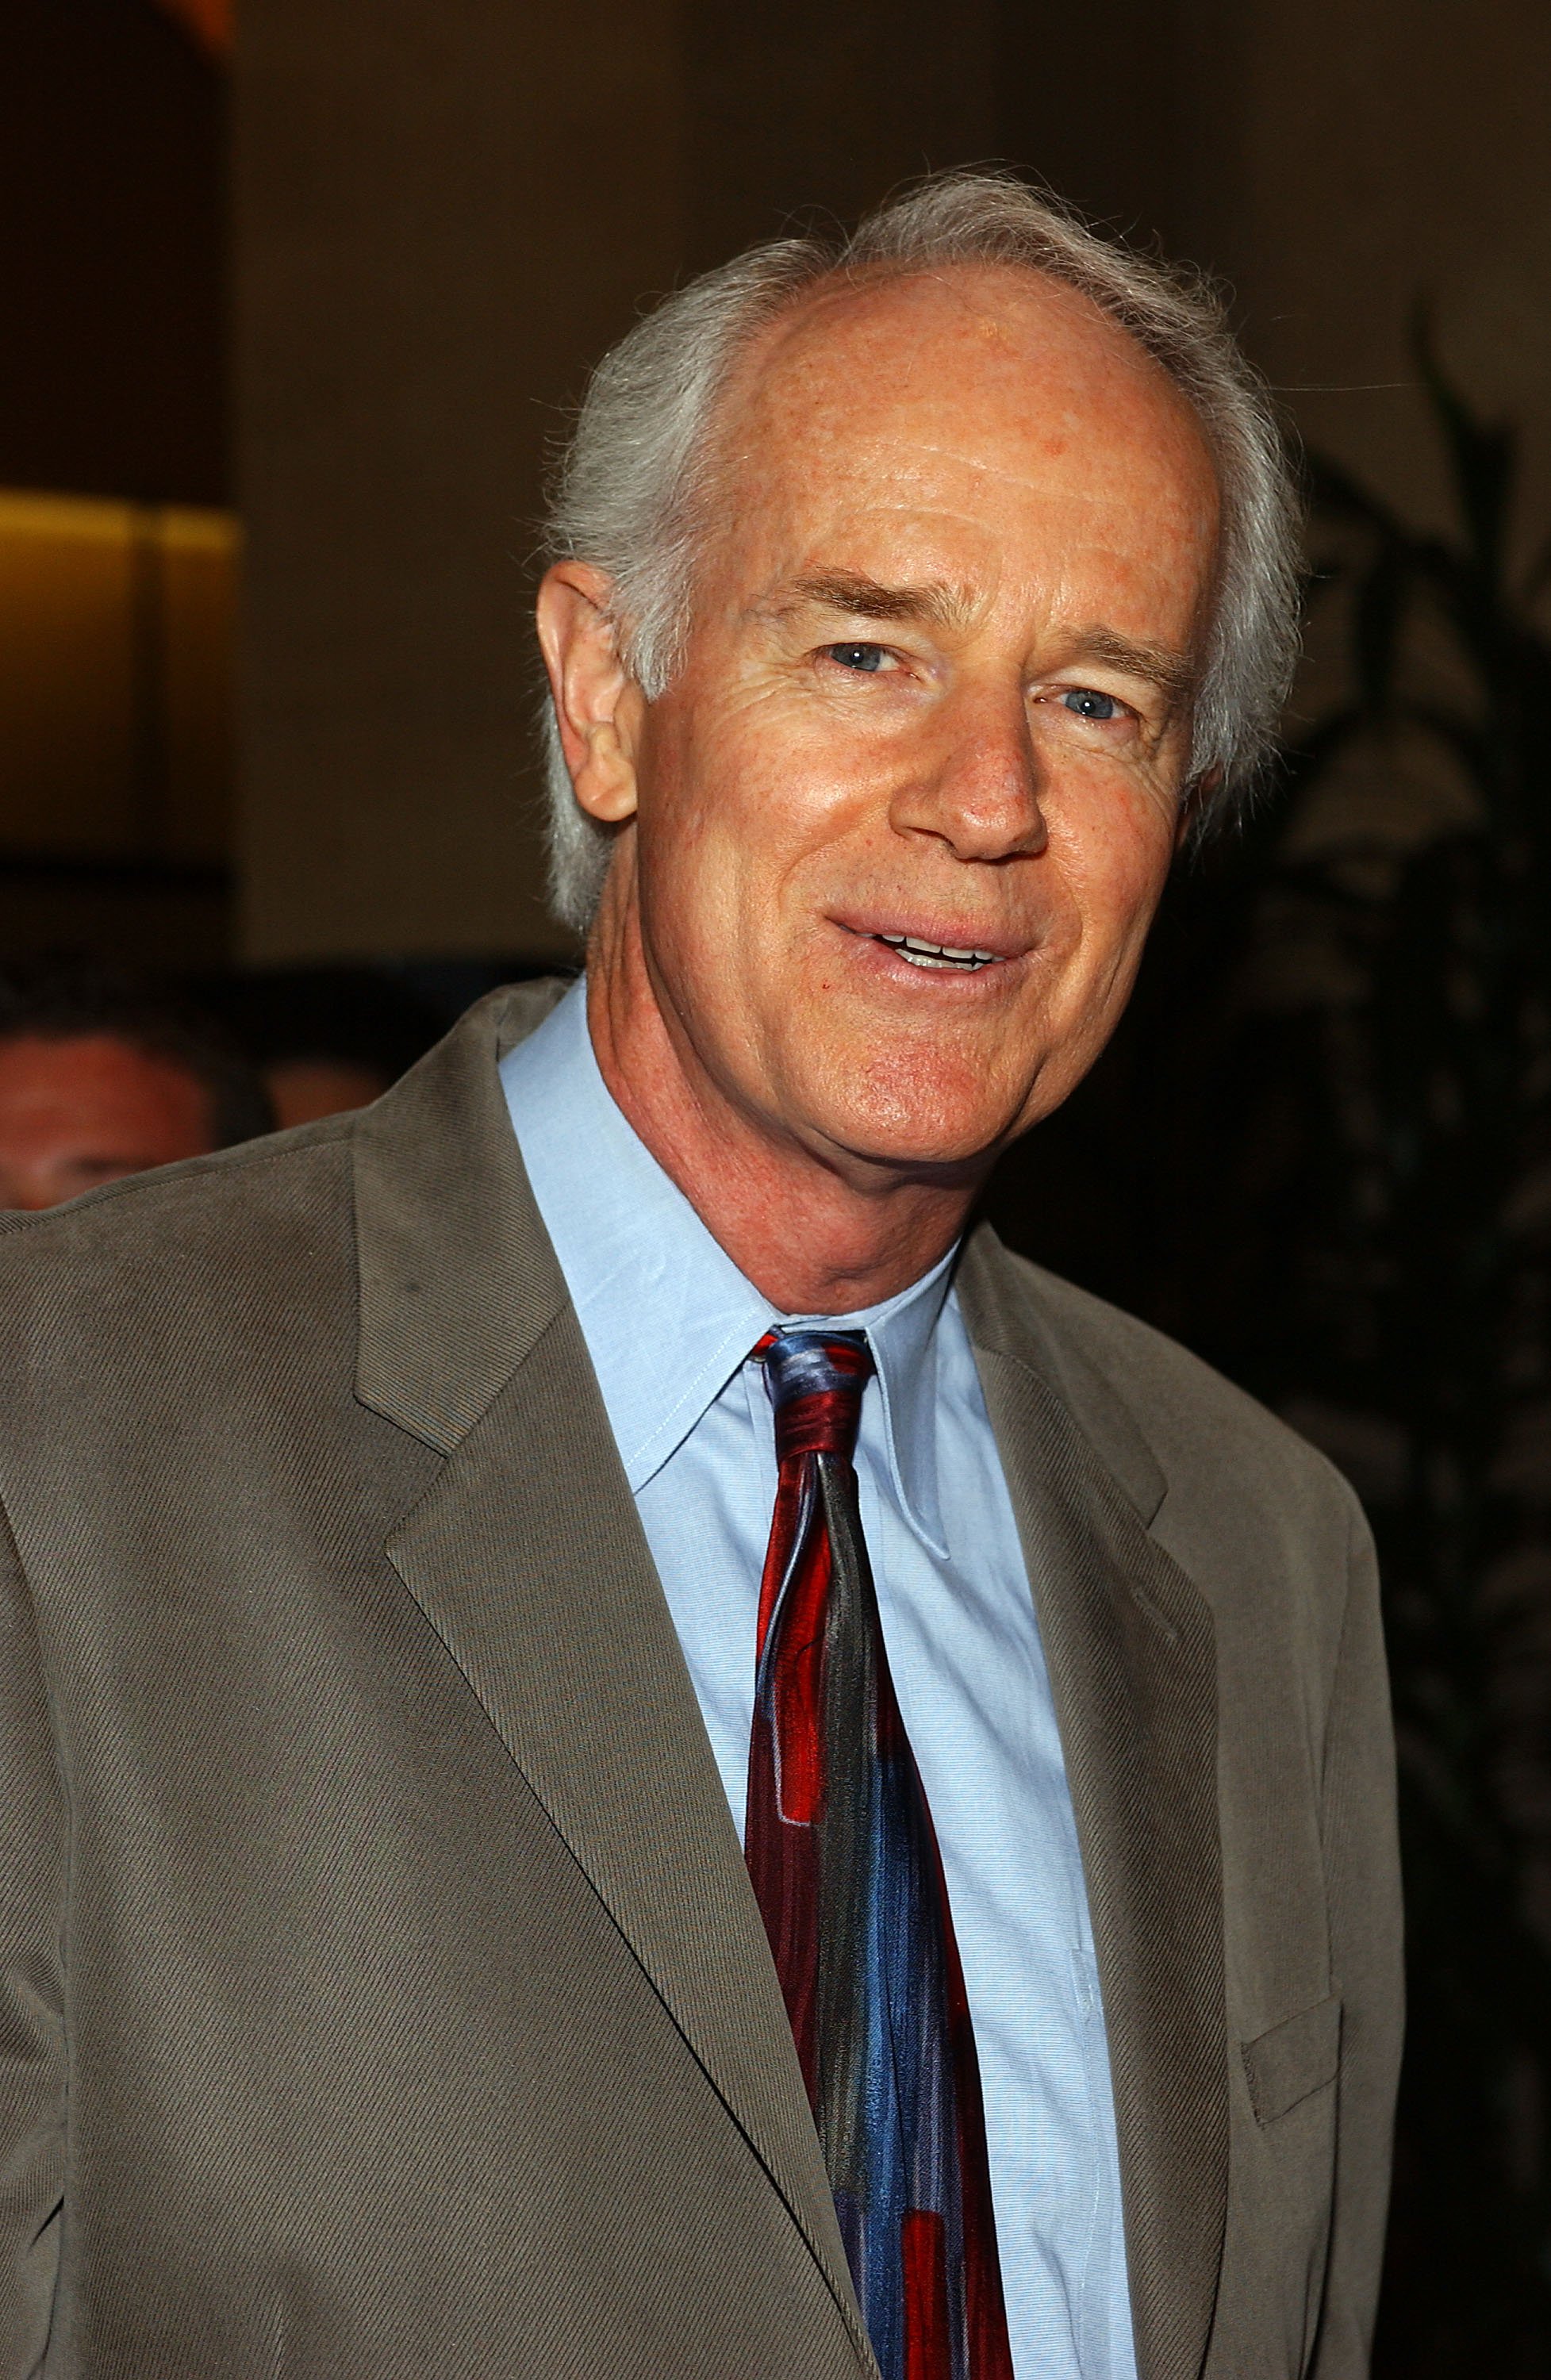 Mike Farrell arriving at the Inaugural Step Up Inspiration Awards Luncheon at the Beverly Hilton Hotel on April 30, 2004 in Beverly Hills, California ┃Source: Getty Images